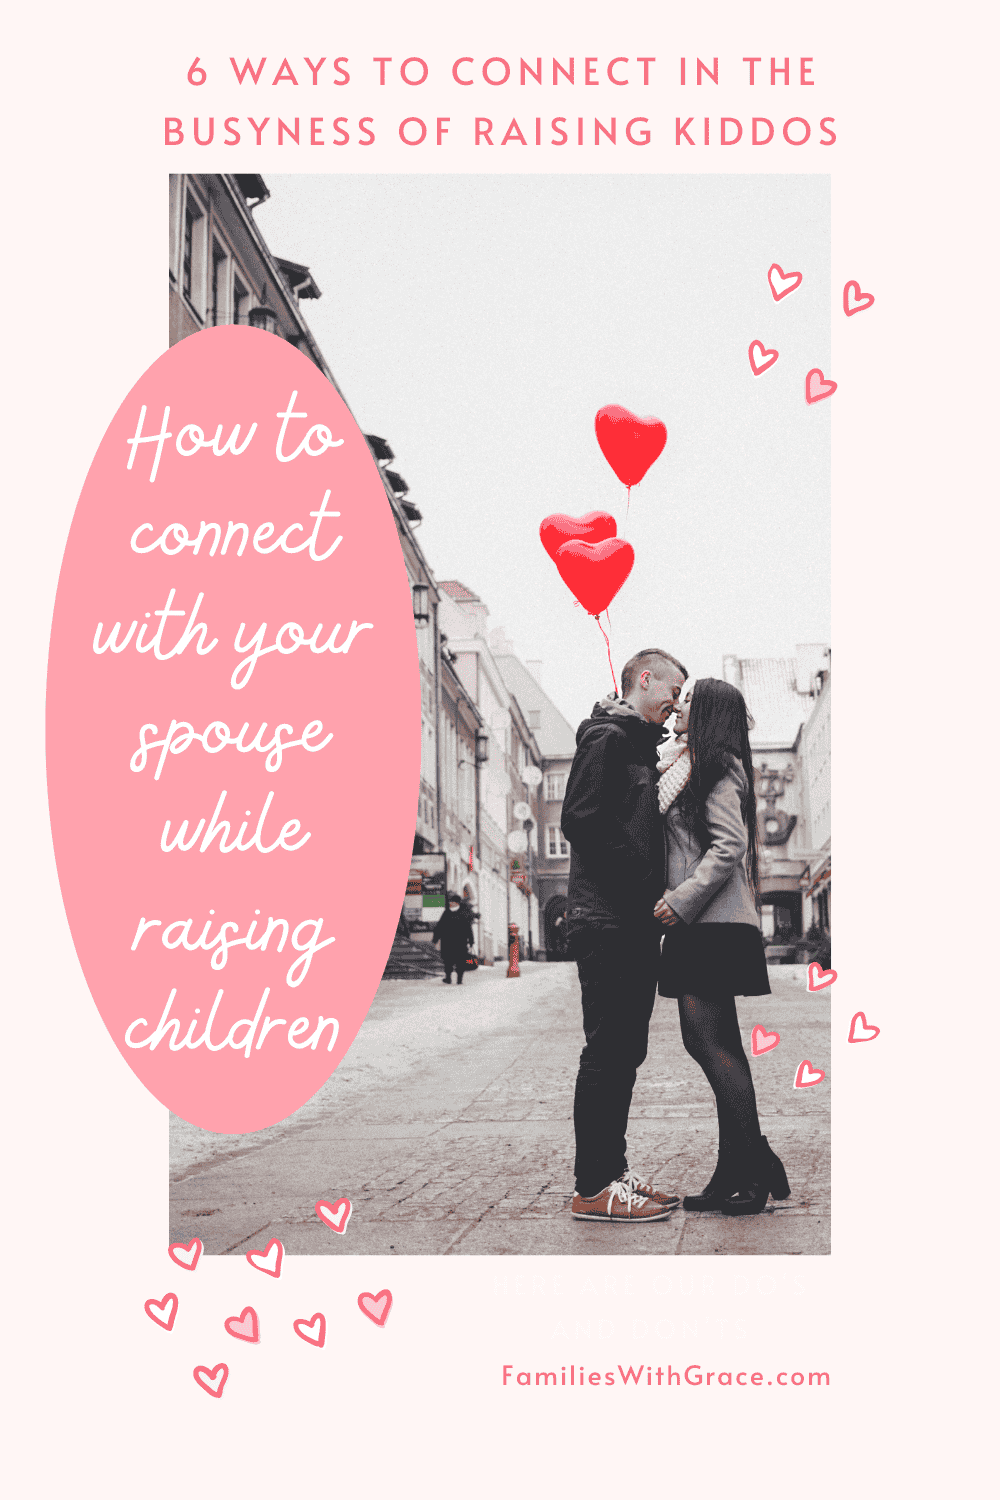 How to connect with your spouse while raising children